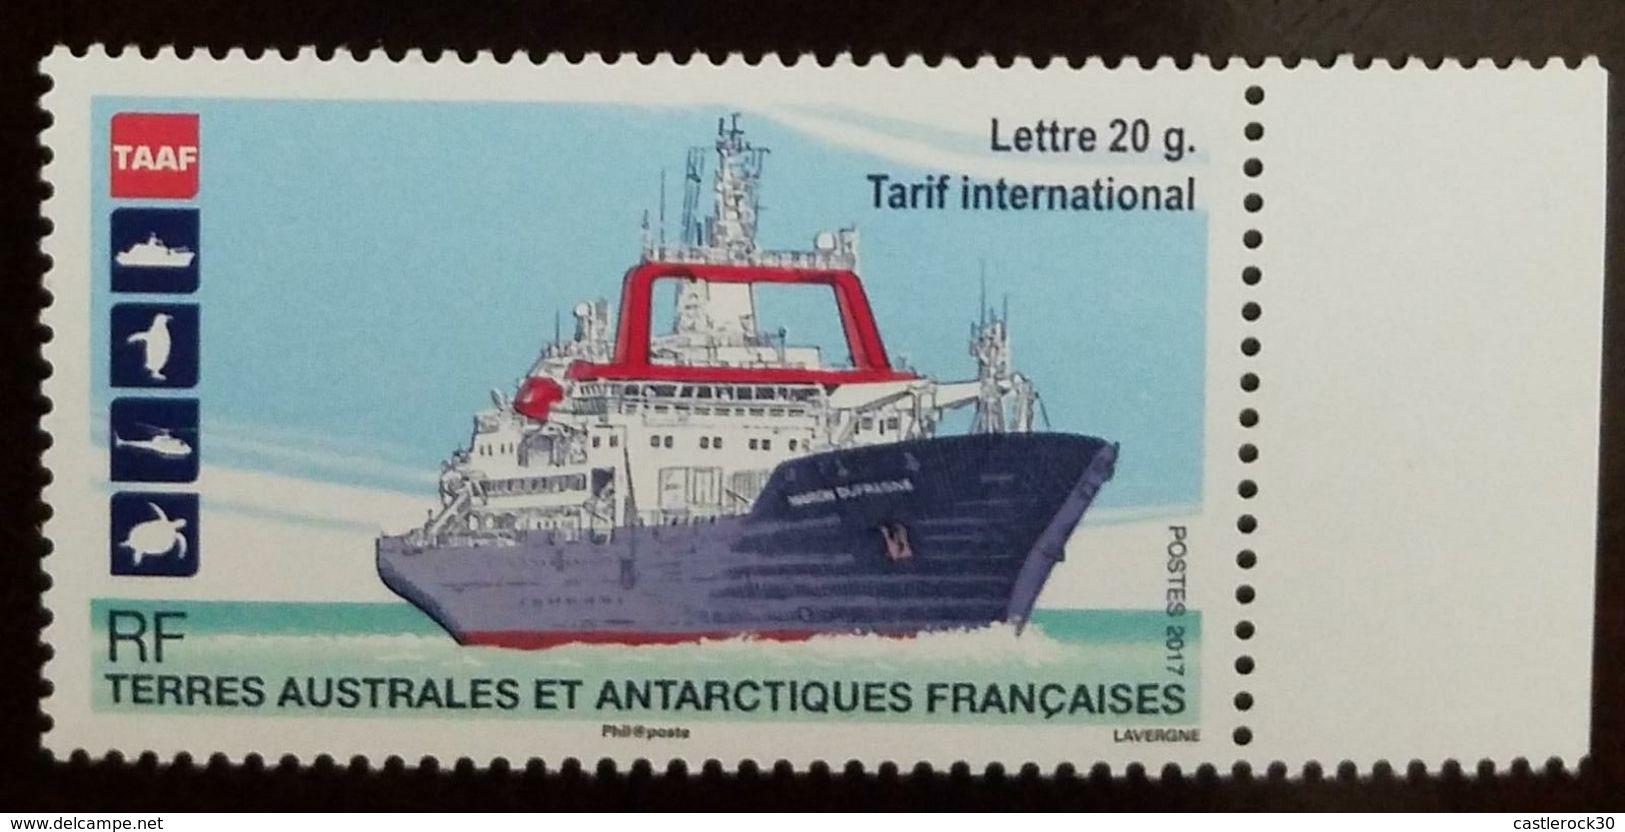 RL) 2017 FRENCH SOUTHERN AND ANTARCTIC LANDS, BOAT, SEA, TAAF, LETTER 20G, PENGUIN, HELICOPTER, MNH - Unused Stamps